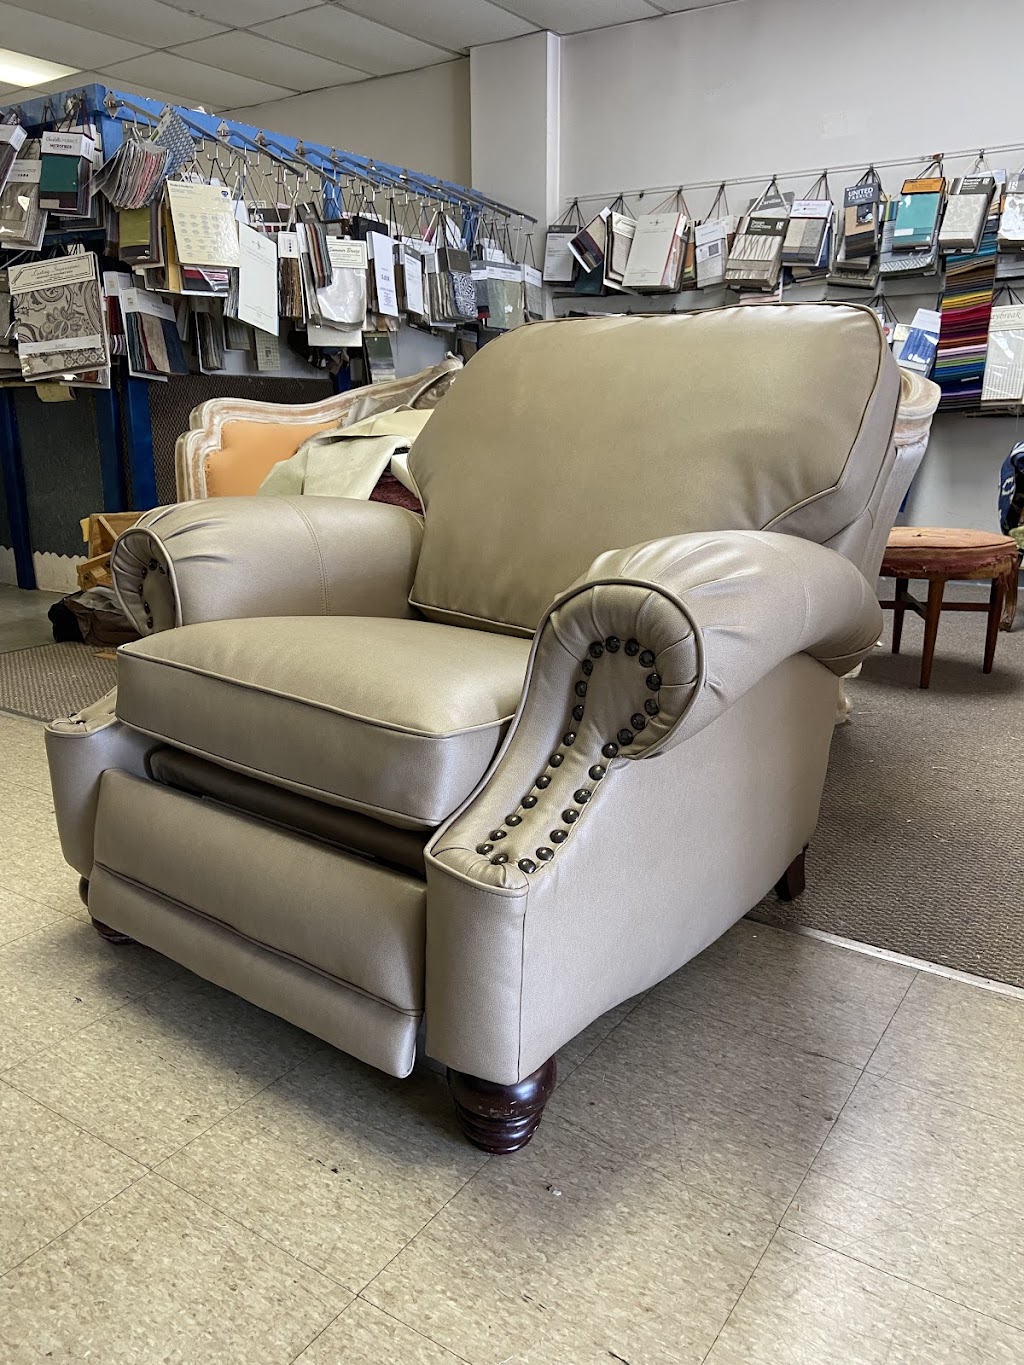 Feasterville Upholstery | 310 Bustleton Pike, Feasterville-Trevose, PA 19053 | Phone: (215) 355-5045